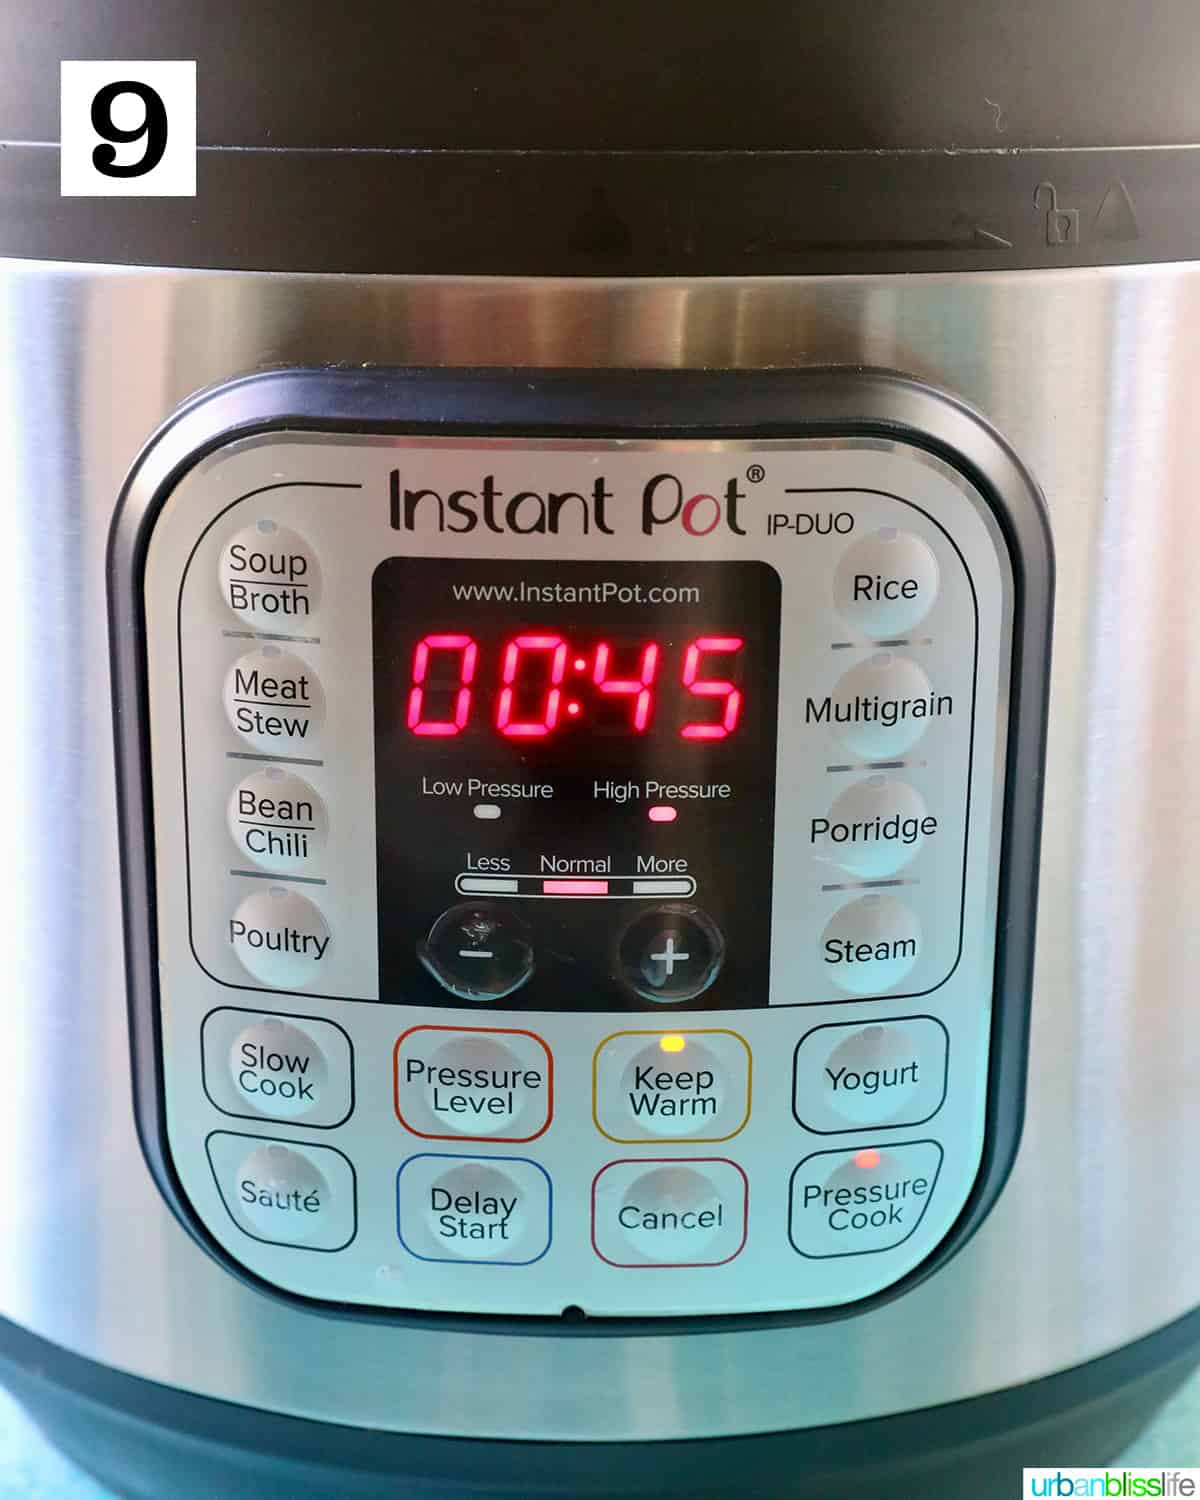 Instant Pot set to pressure cook for 45 minutes.